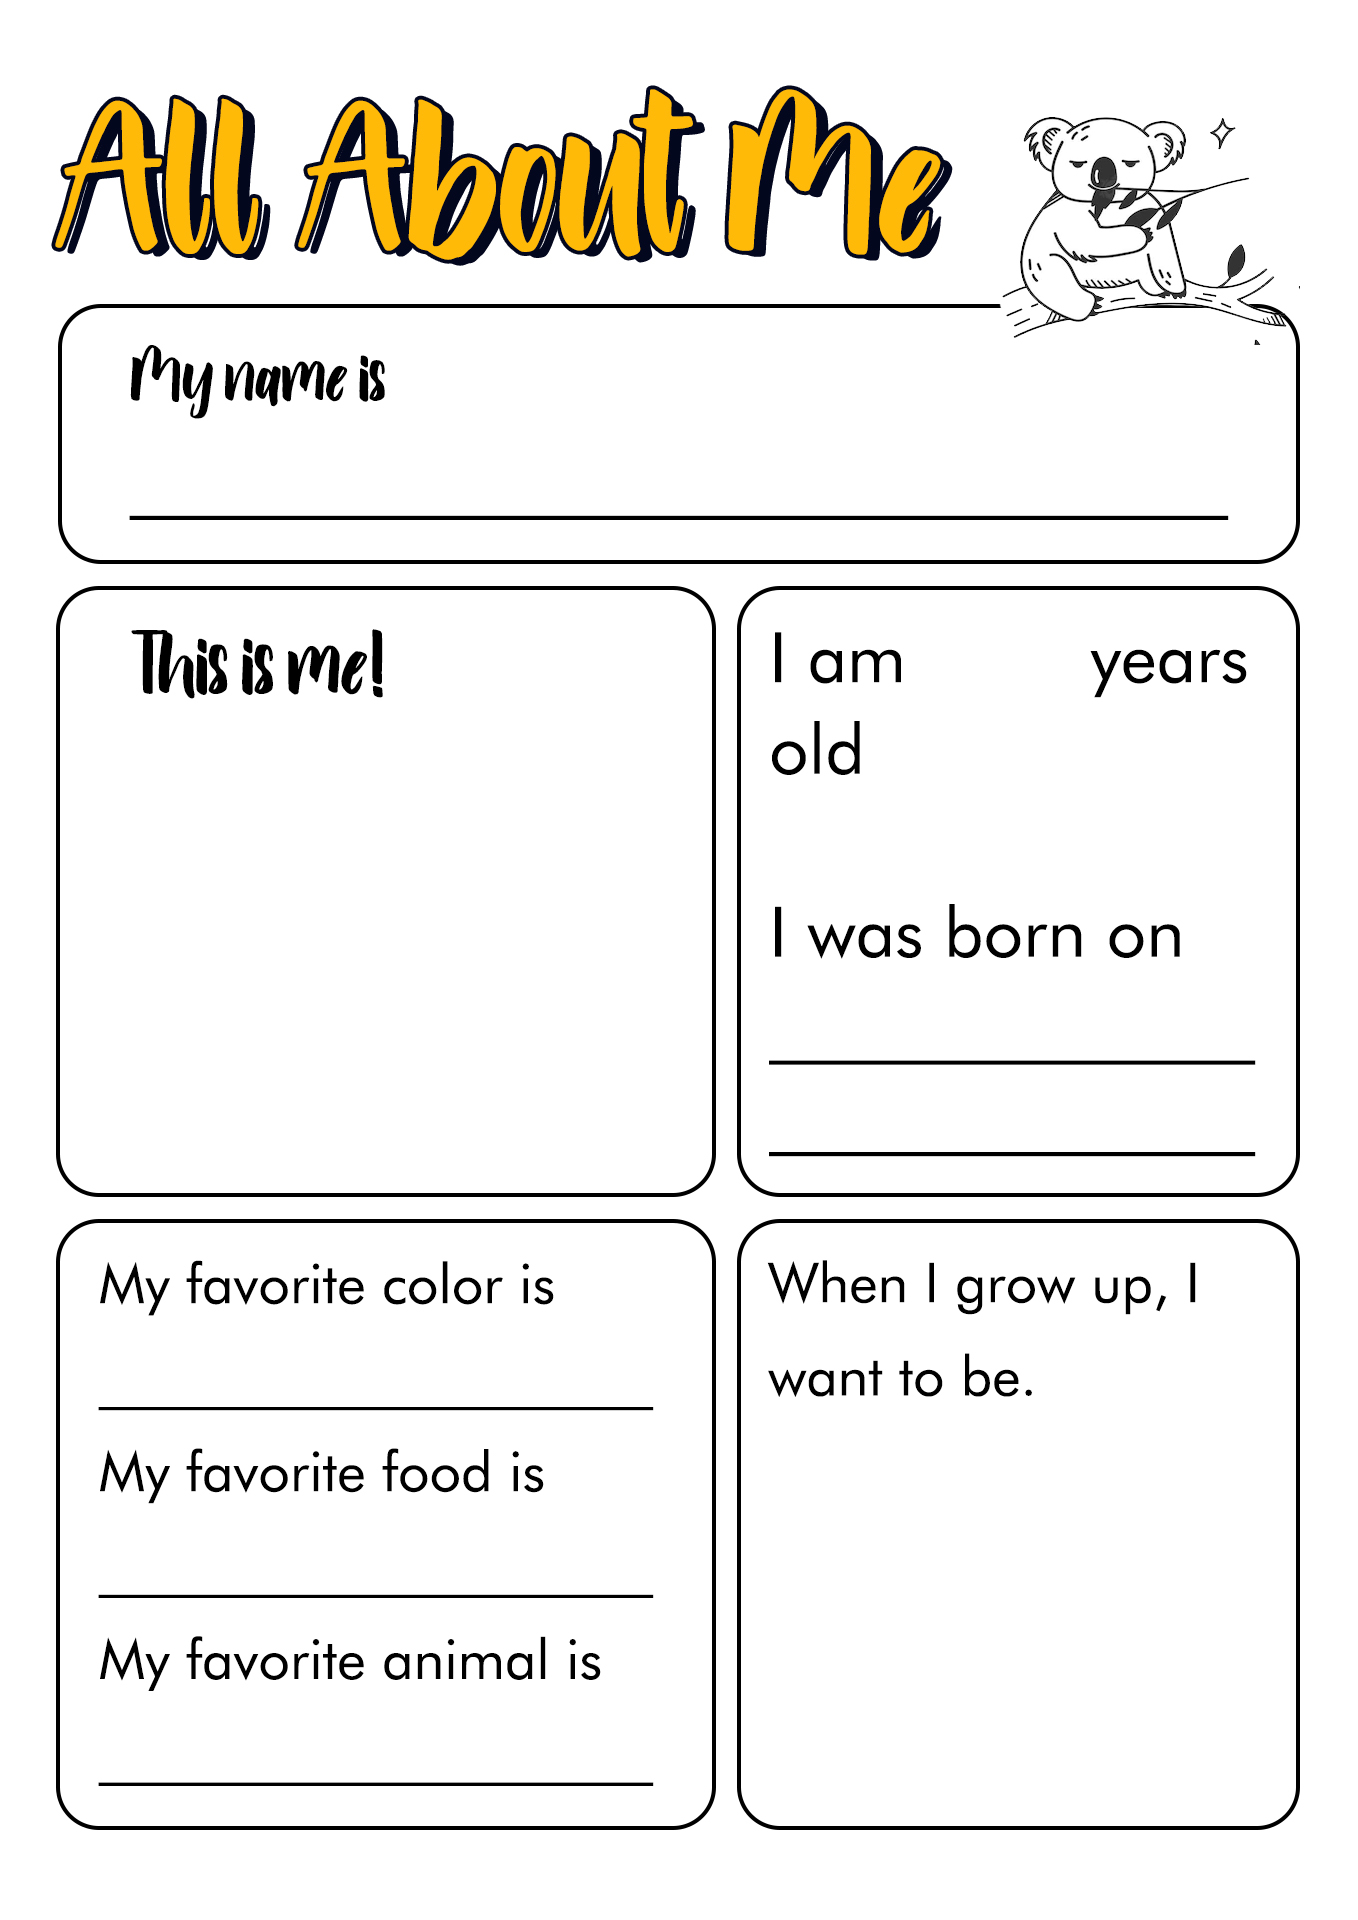 About.me Worksheets for Middle School Image